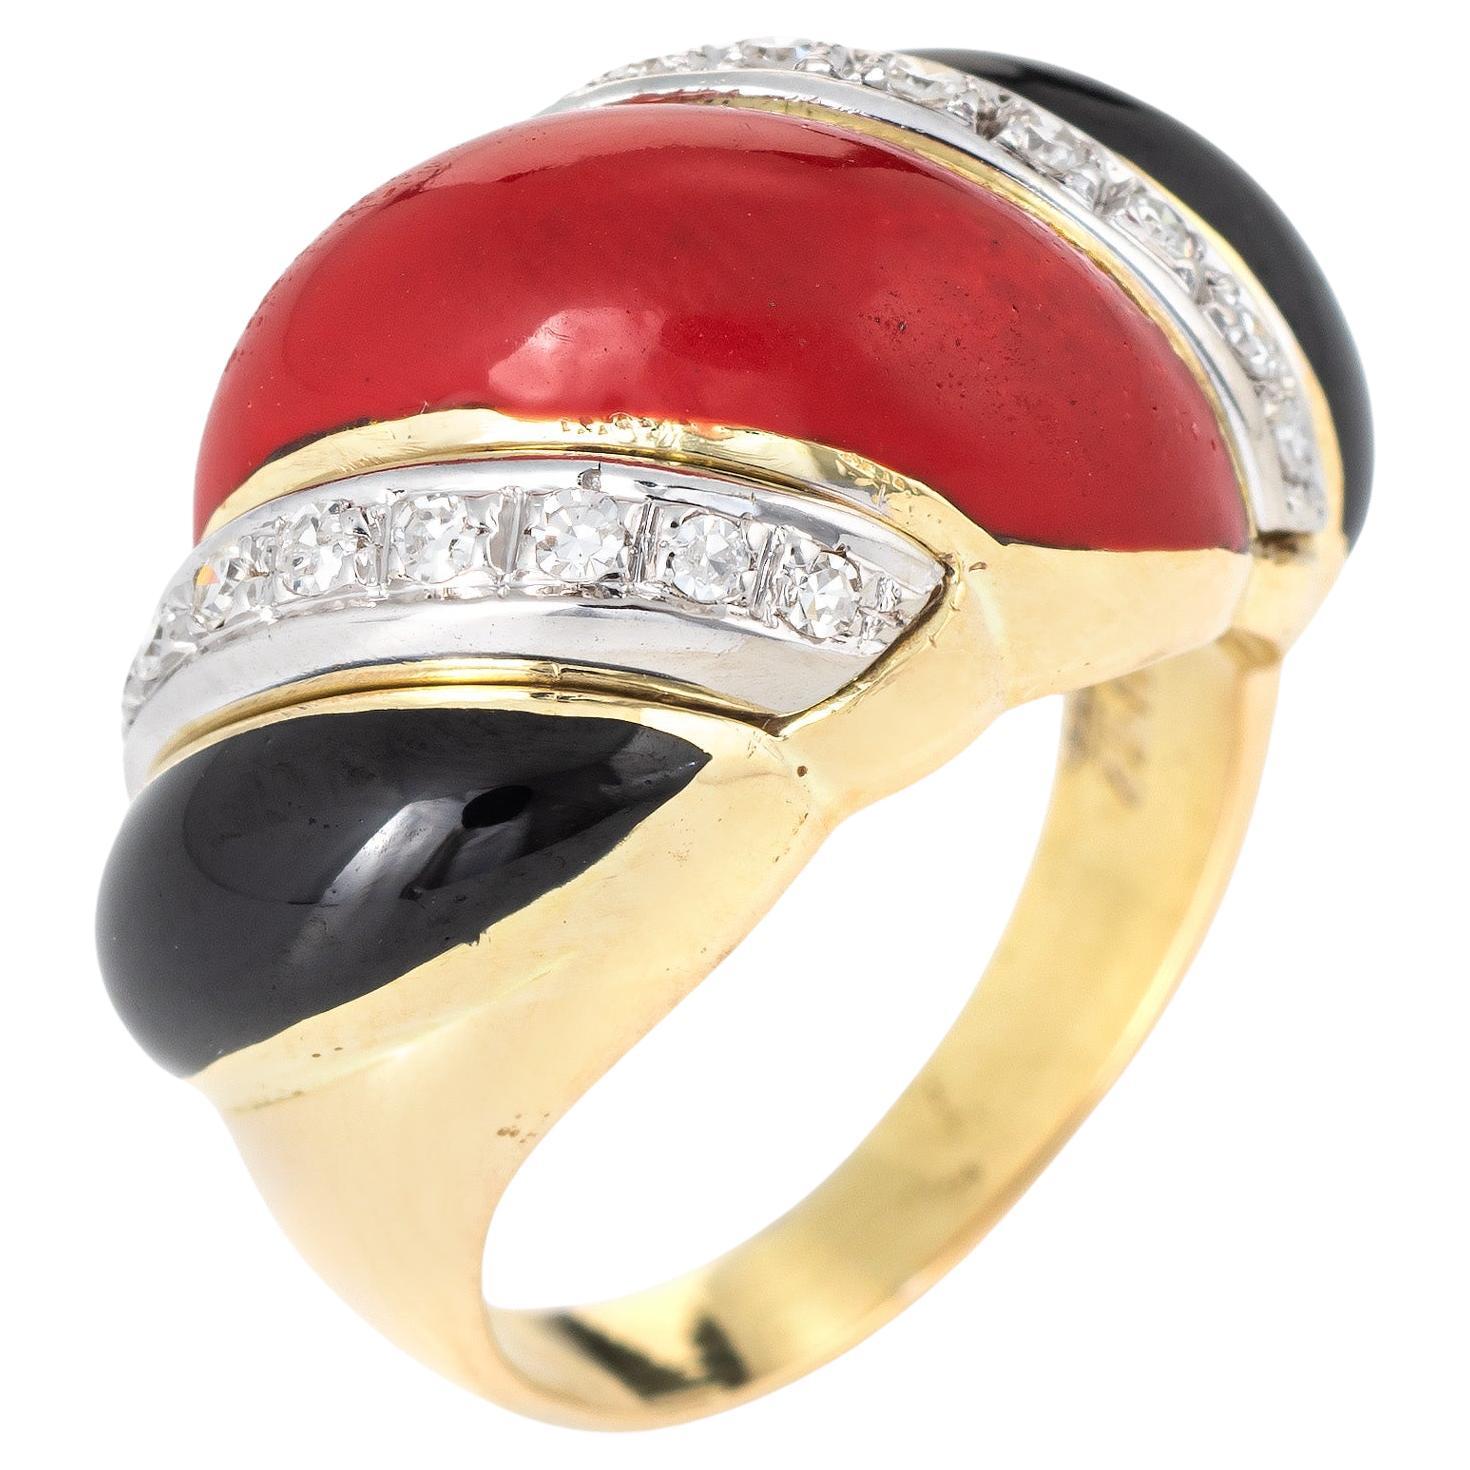 Red Coral Onyx Diamond Ring Vintage 14k Yellow Gold Scrolled Band Jewelry Sz 5.5 For Sale